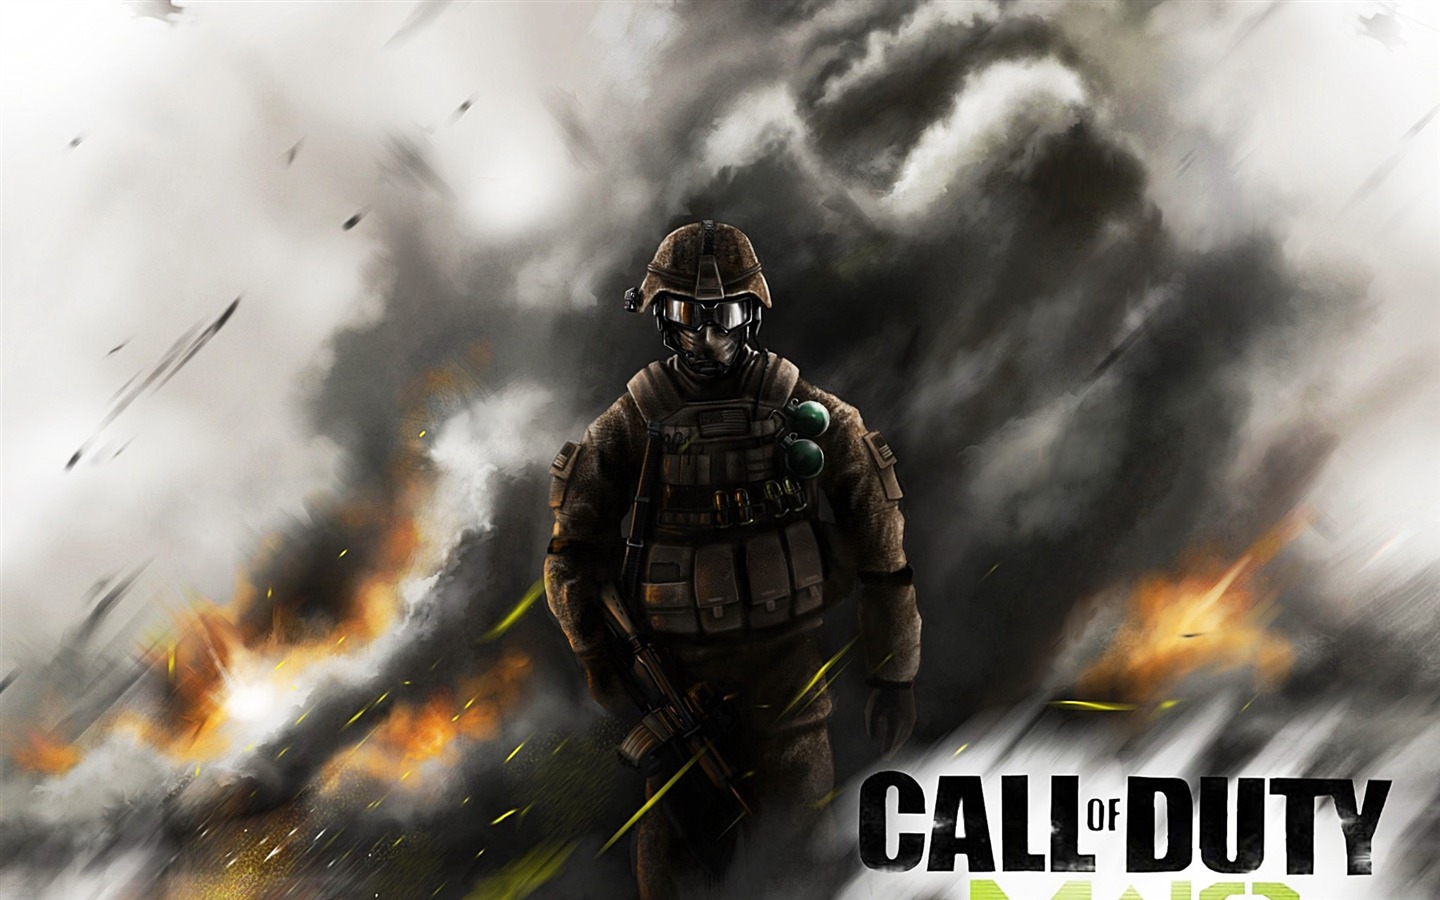 Call of Duty: MW3 HD Wallpapers #15 - 1440x900